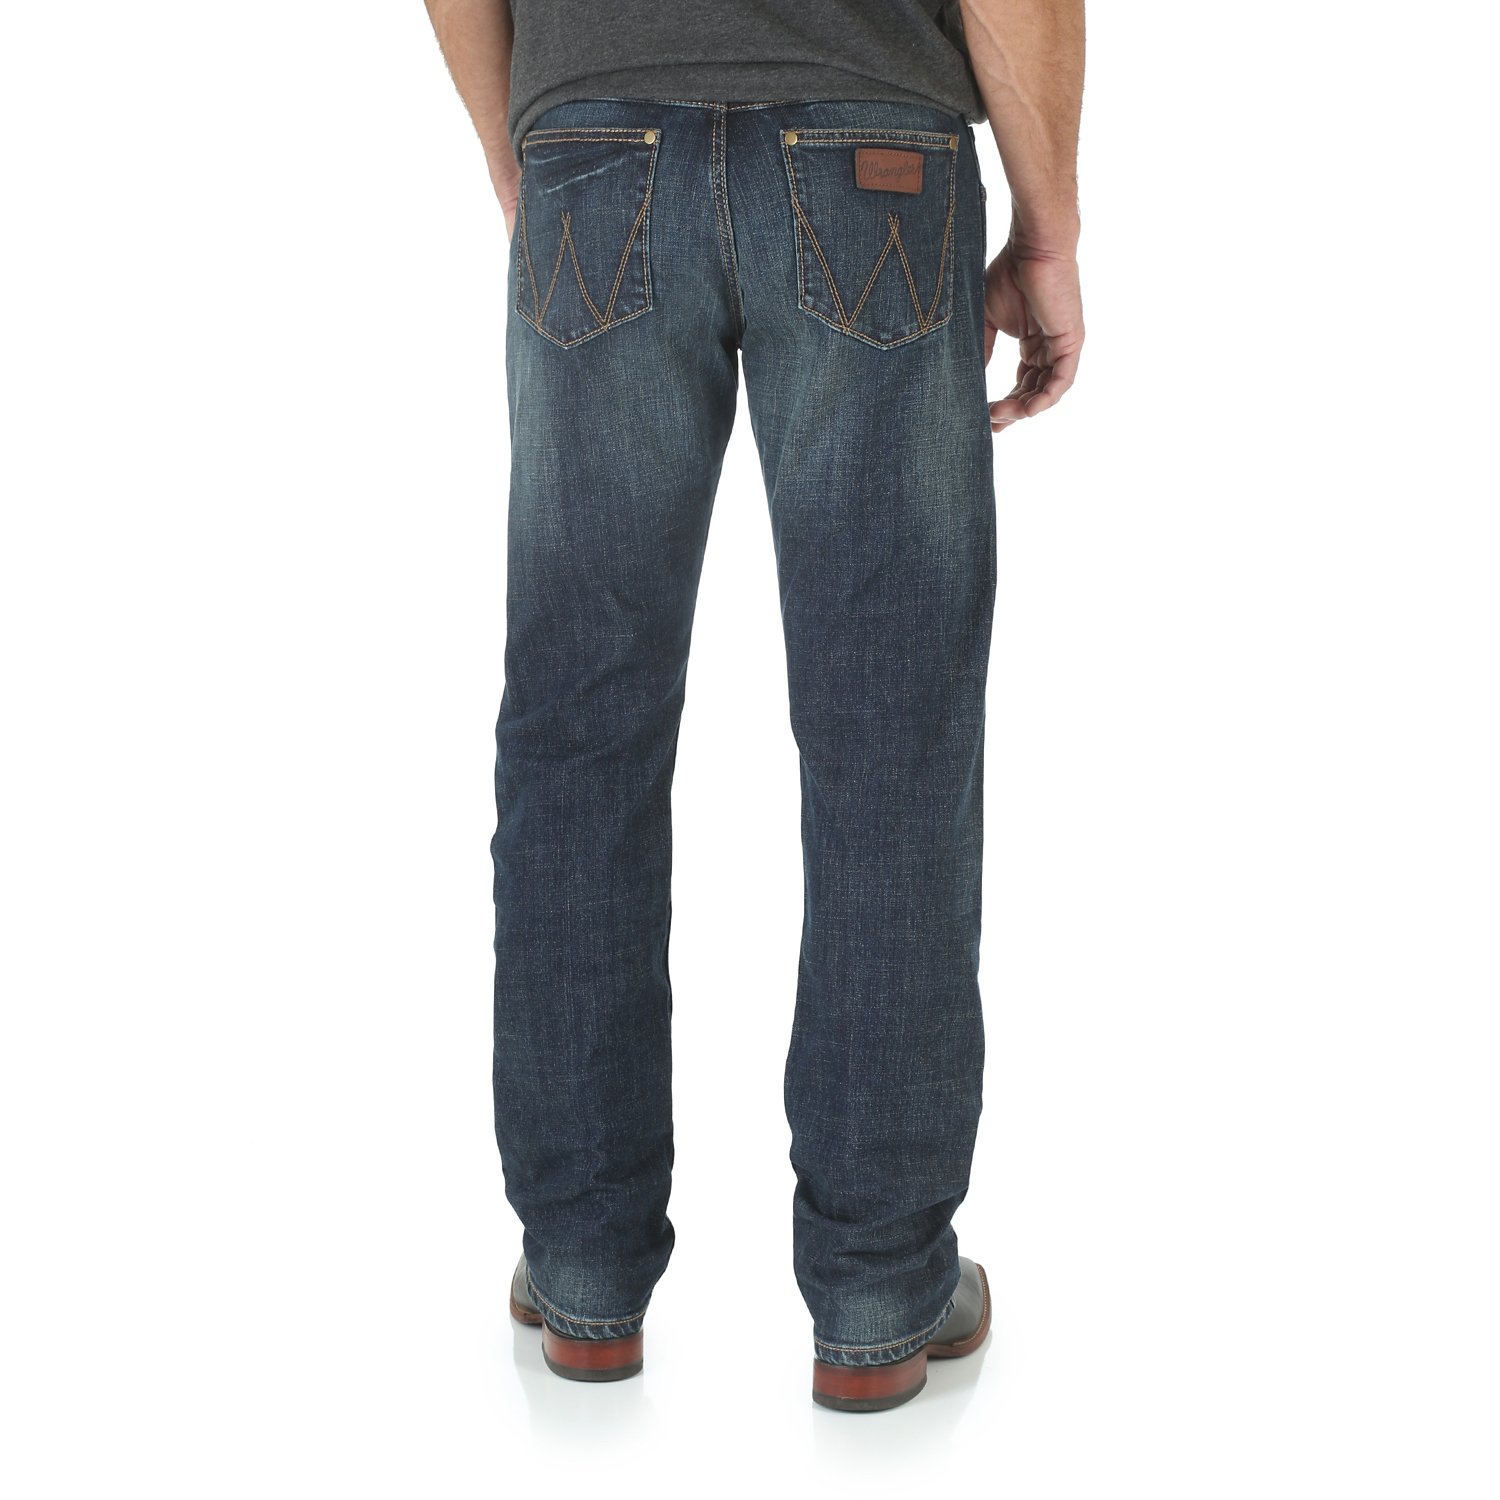 mens lightweight jeans for hot weather